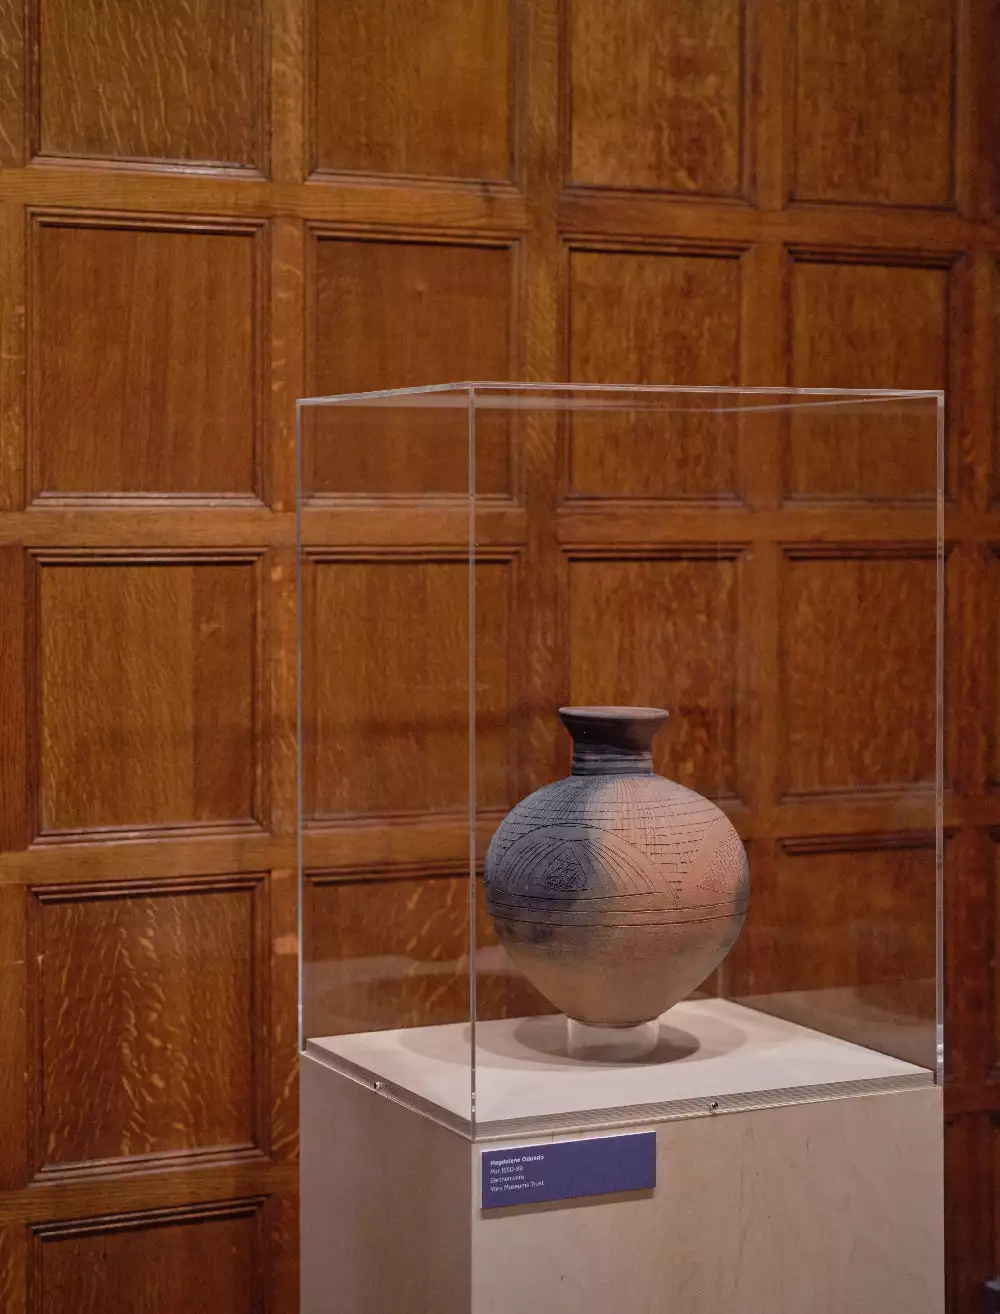 Image shows a clay, multi-tonal vase on a grey plinth inside a glass case. it is set against a wooden panelled wall